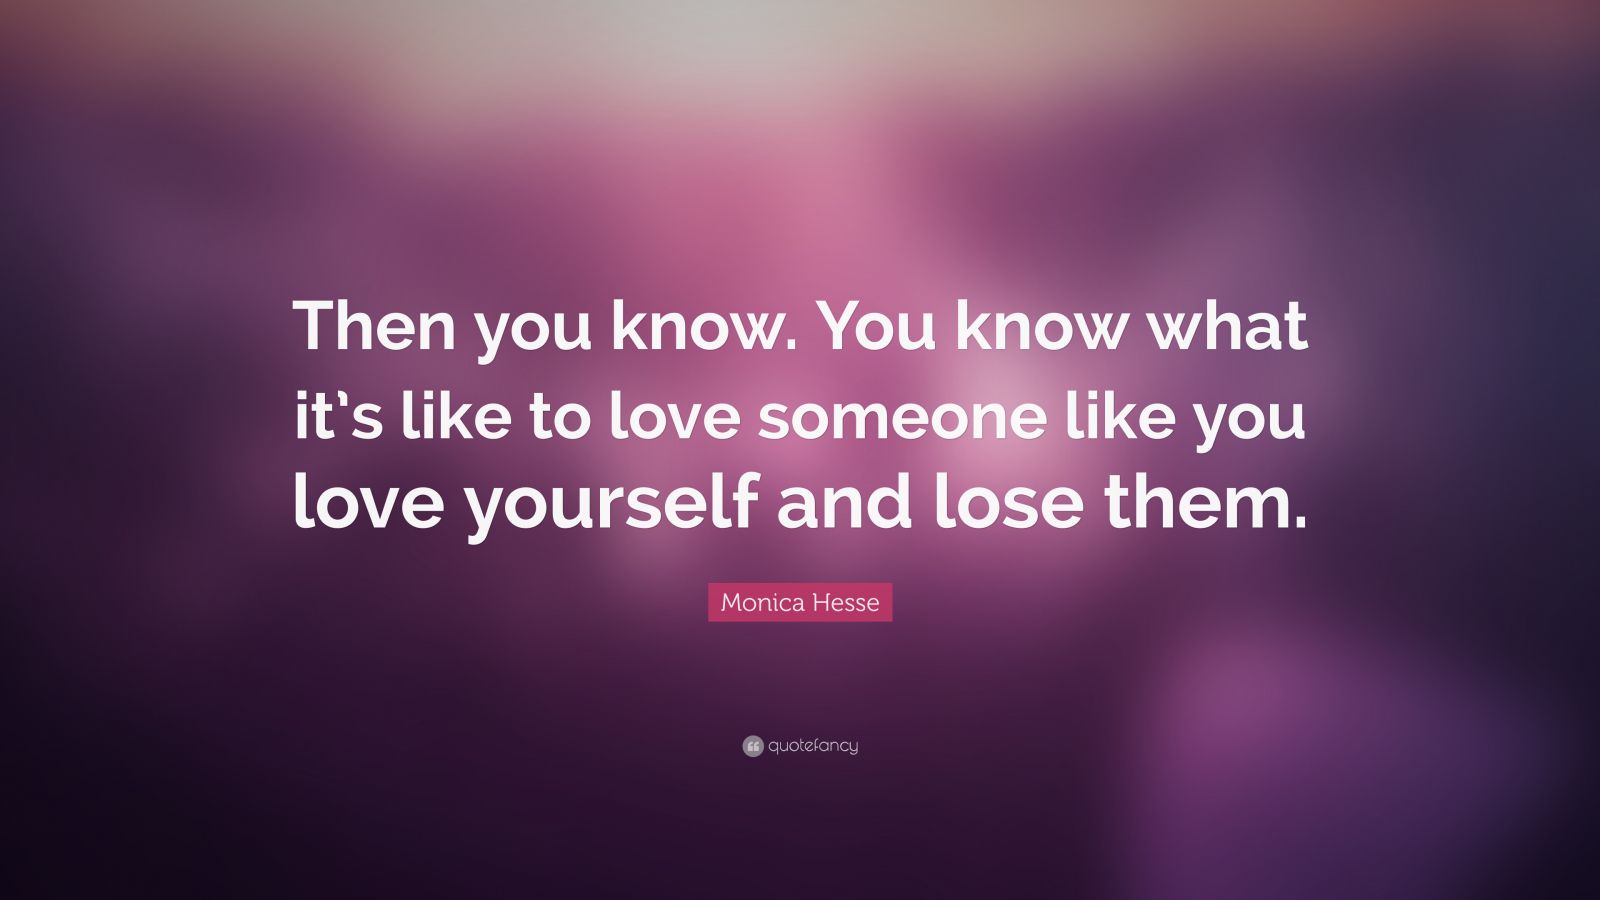 Monica Hesse Quote: “Then you know. You know what it’s like to love ...